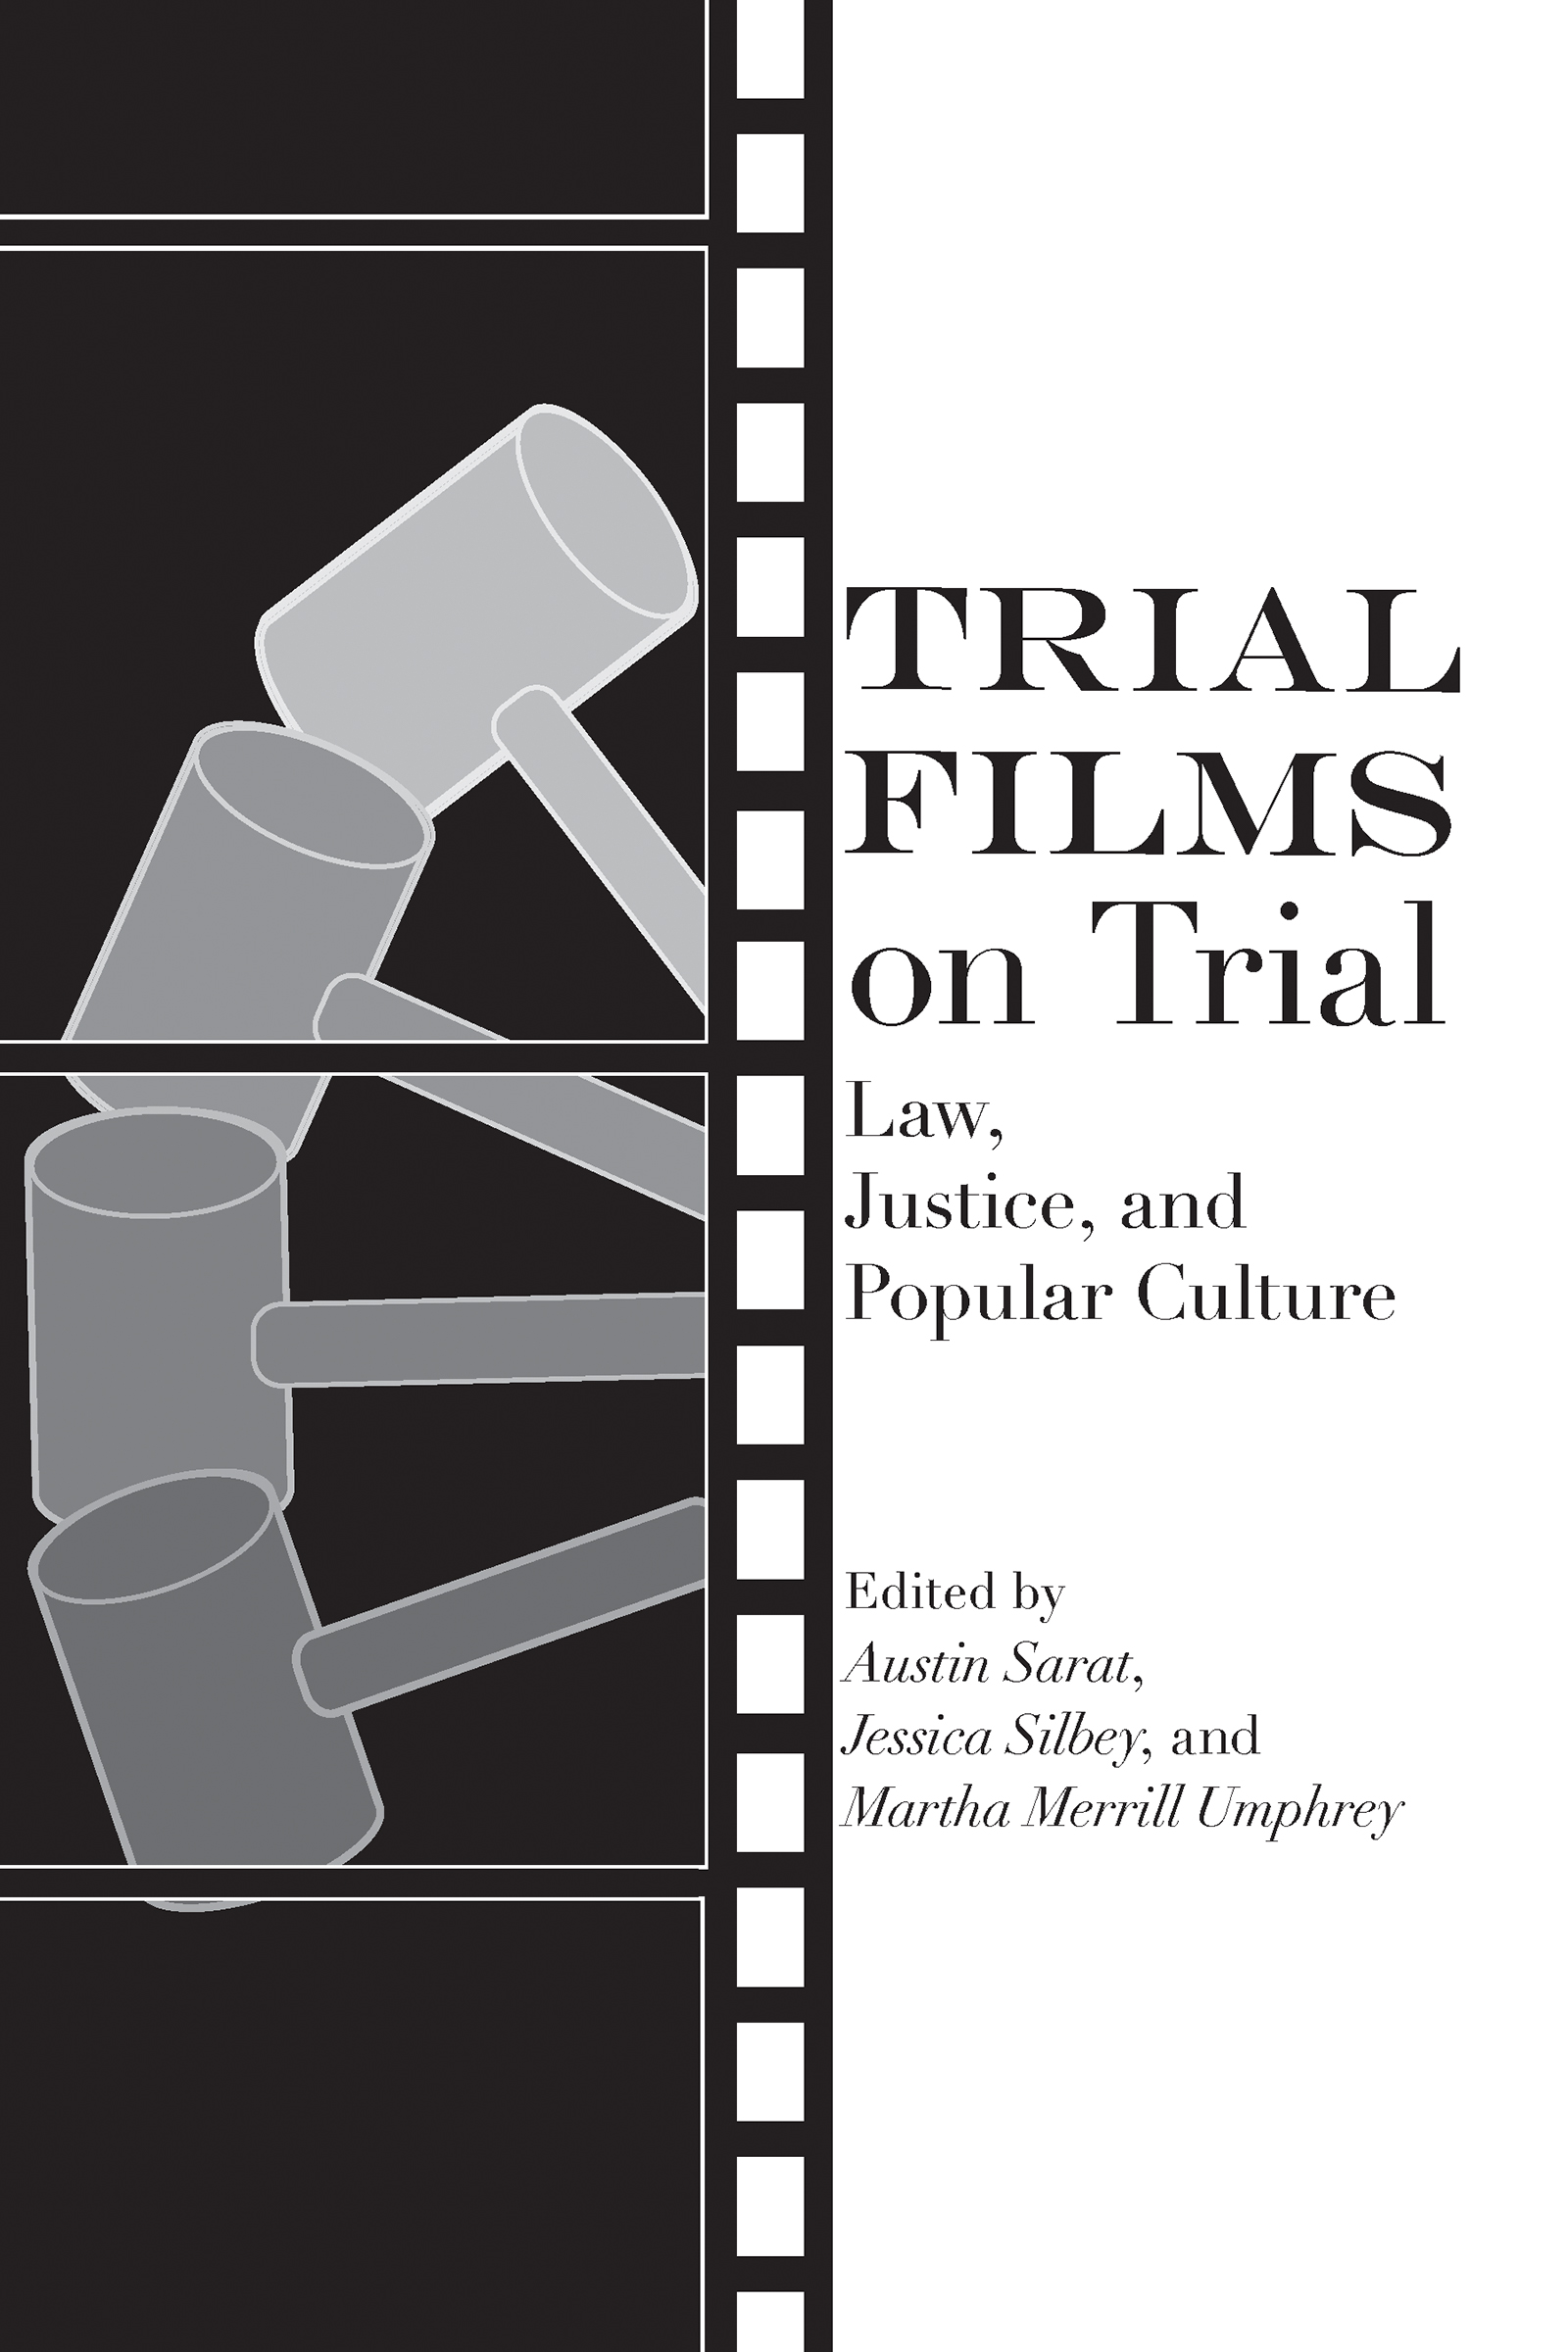 Book Cover-Trial Film on Trial